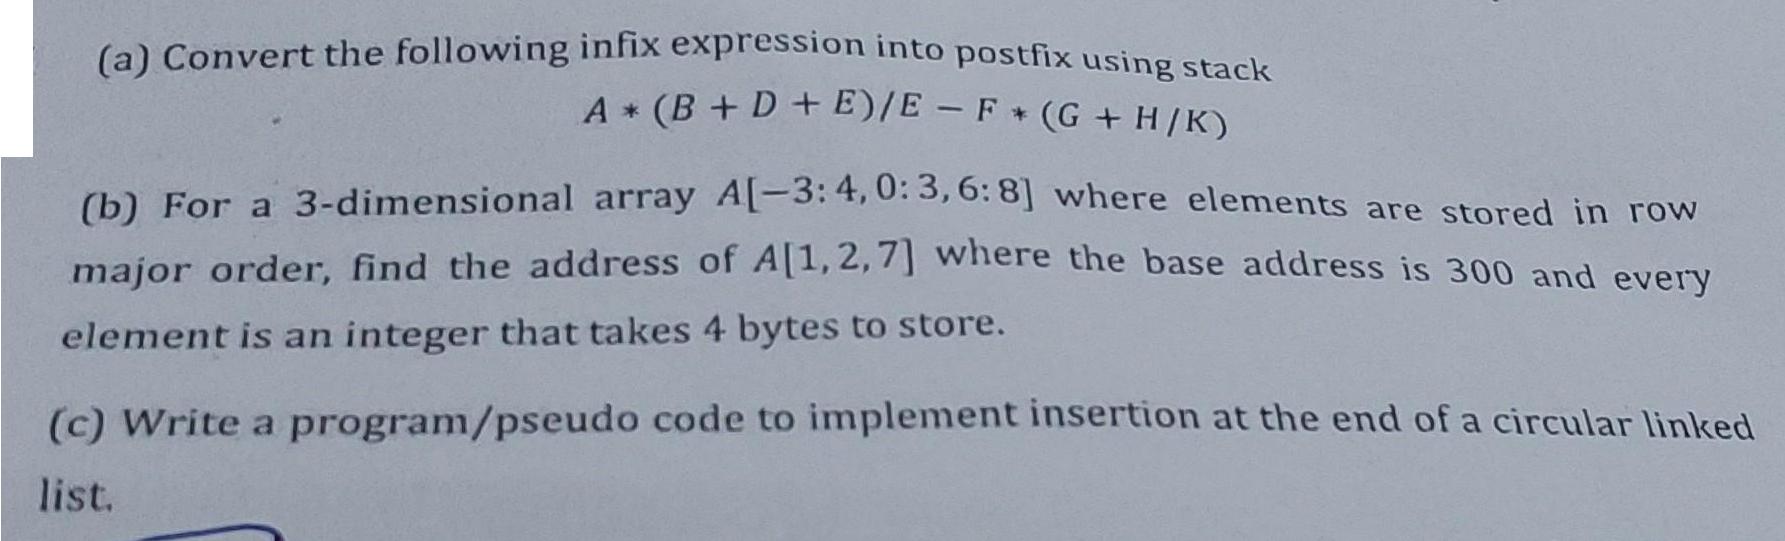 (a) Convert the following infix expression into postfix using stack A+ (B+D+E)/E - F (G+ H/K) (b) For a